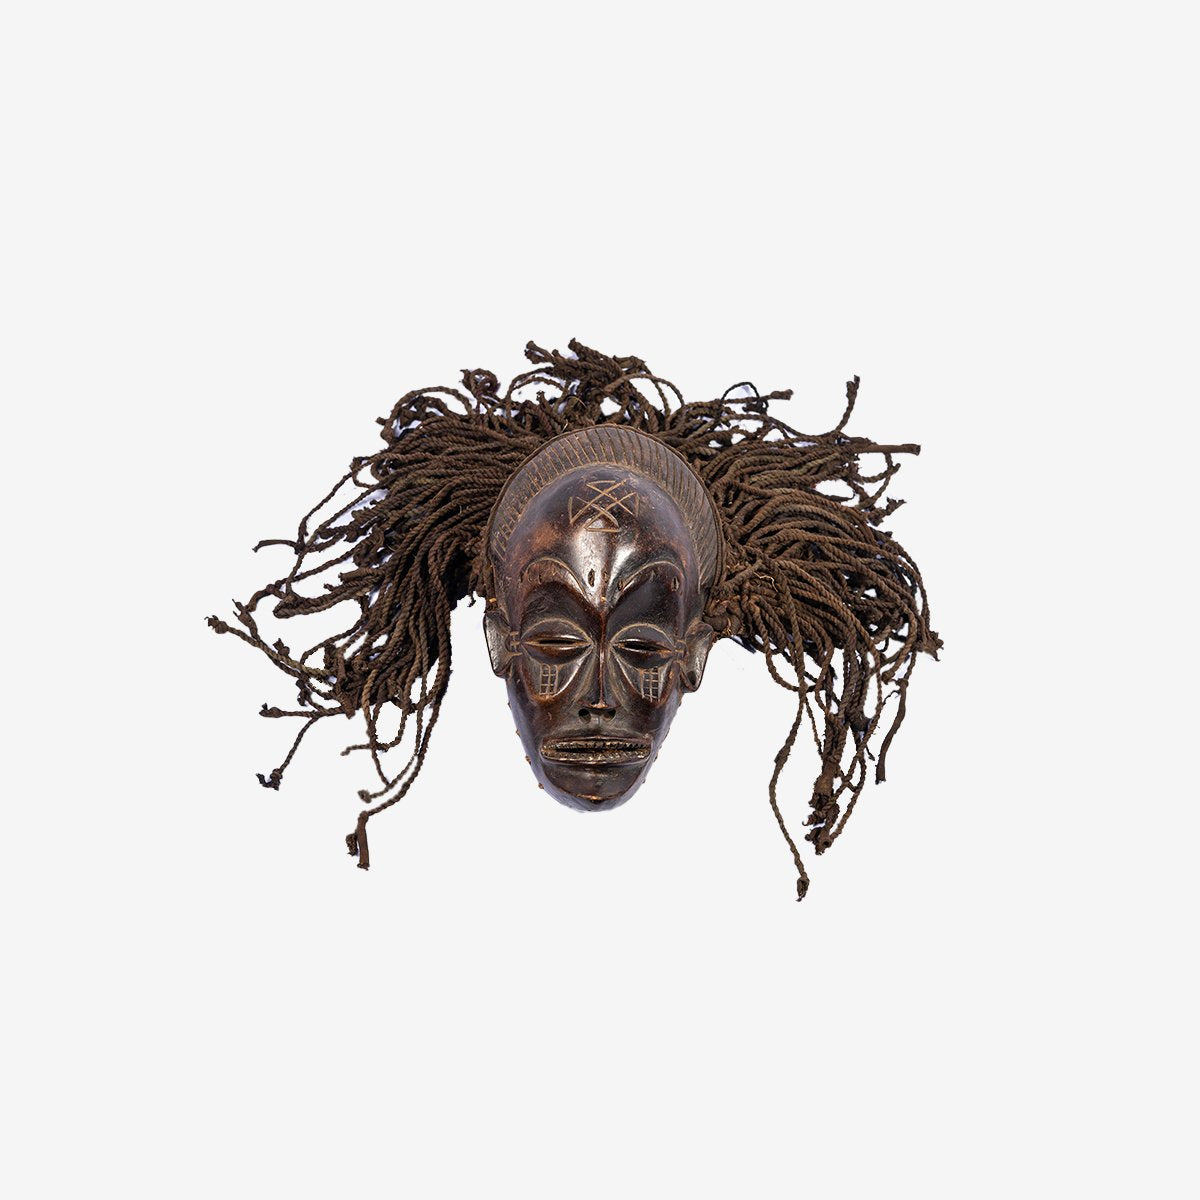 Chokwe Mask - Authentic African handicrafts | Clothing, bags, painting, toys & more - CULTURE HUB by Muthoni Unchained